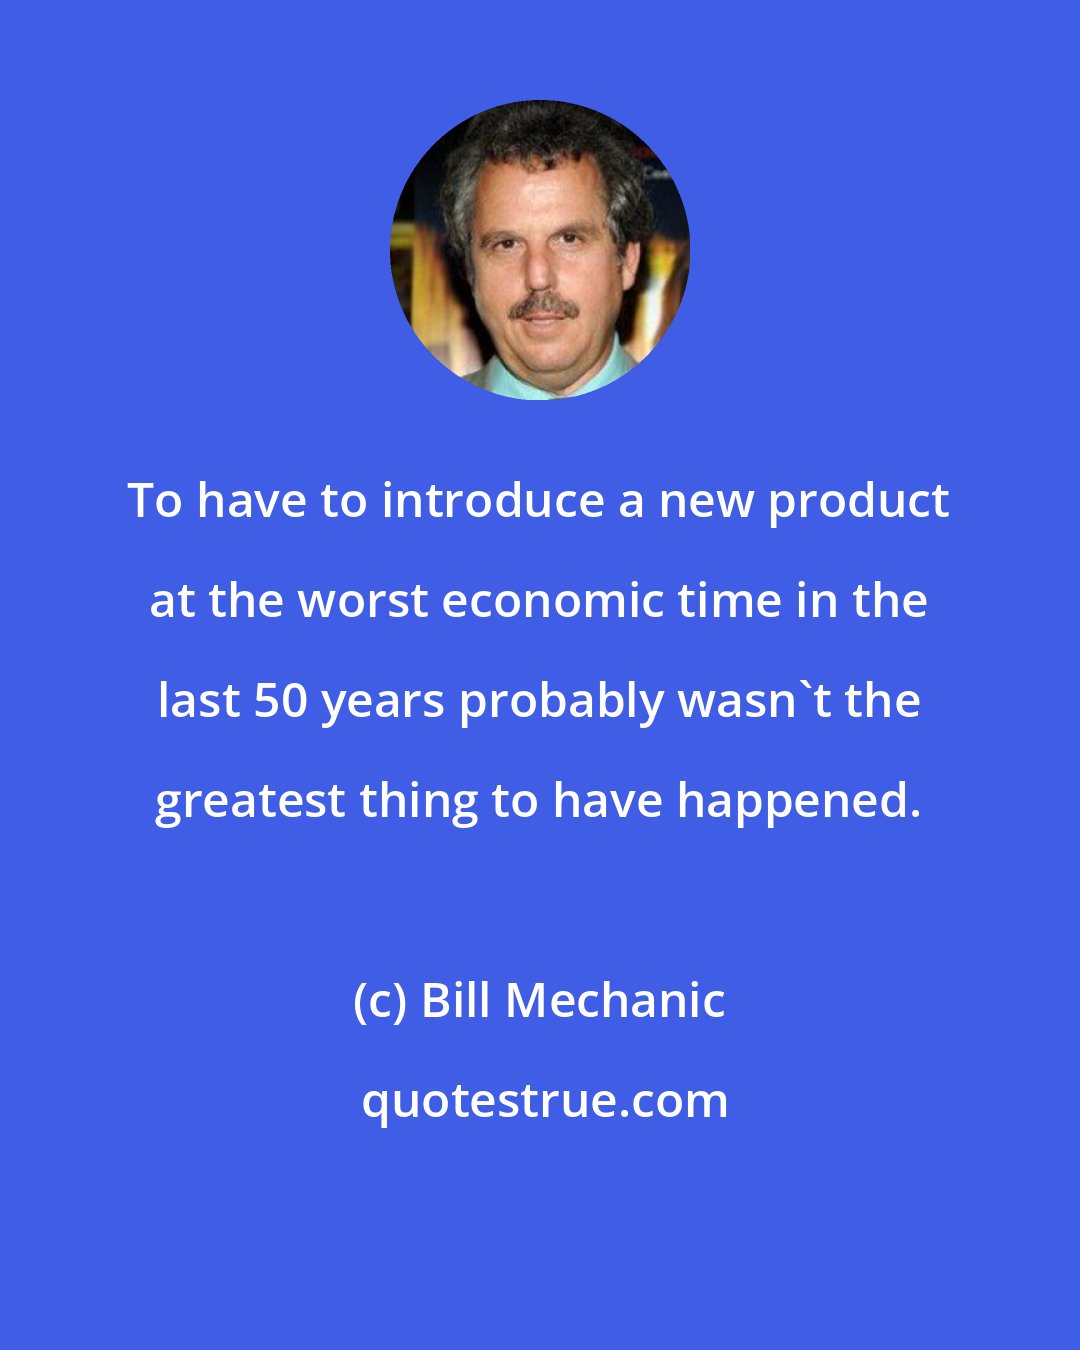 Bill Mechanic: To have to introduce a new product at the worst economic time in the last 50 years probably wasn't the greatest thing to have happened.